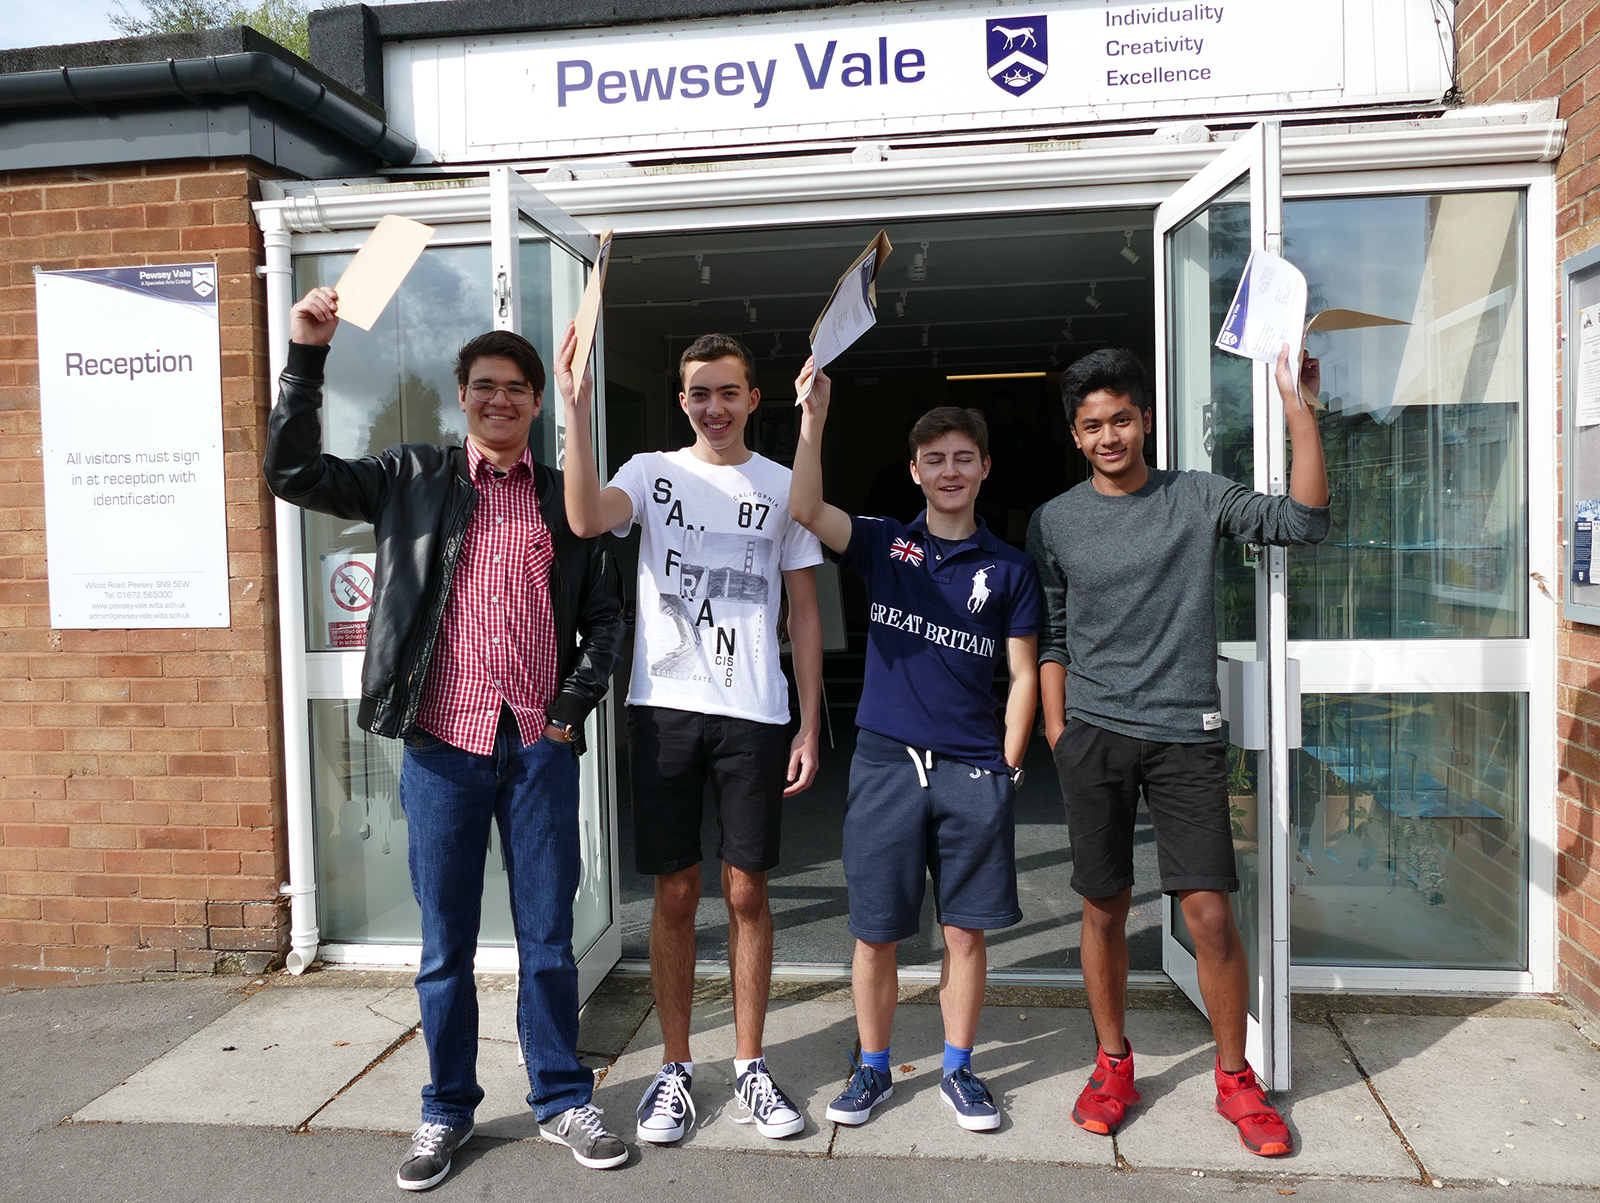 Pewsey Vale students Sherwin Panaligan, Toby Merrett, Max Richards and Vicktor Sergee celebrate their GCSE results